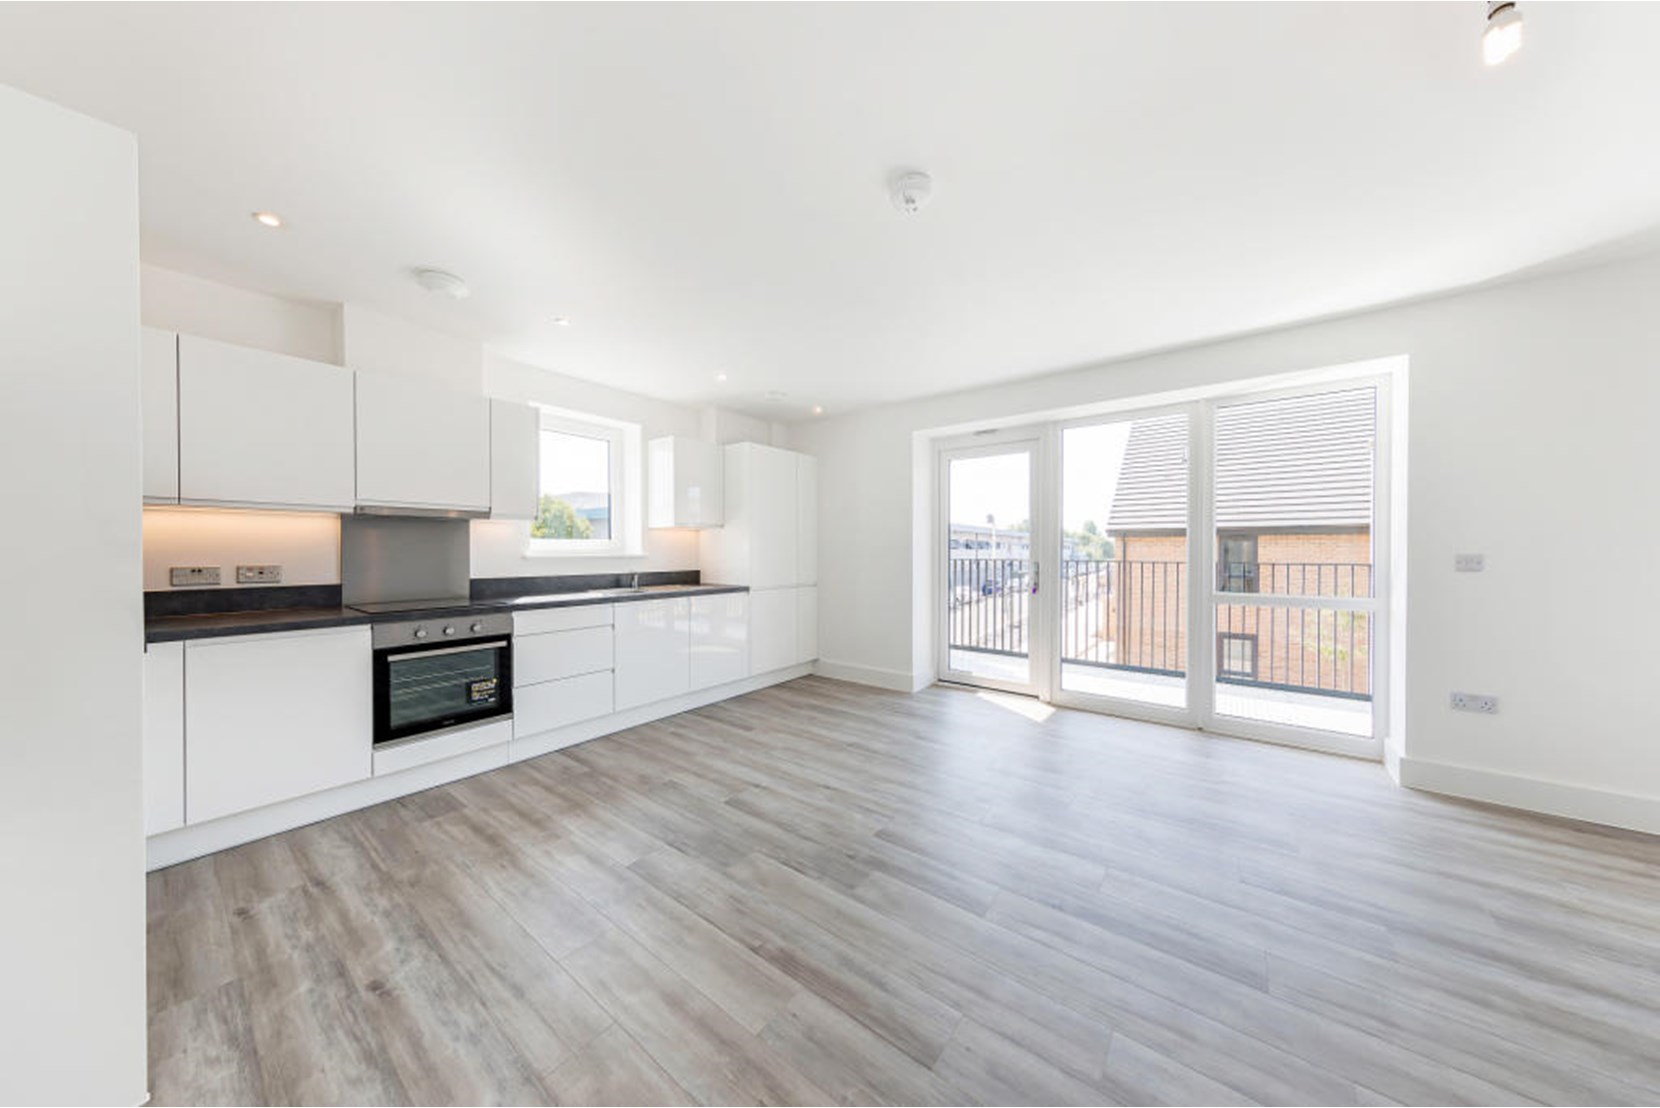 Apartments to Rent by Hera at Basalt Court, Romford, RM7, living kitchen area